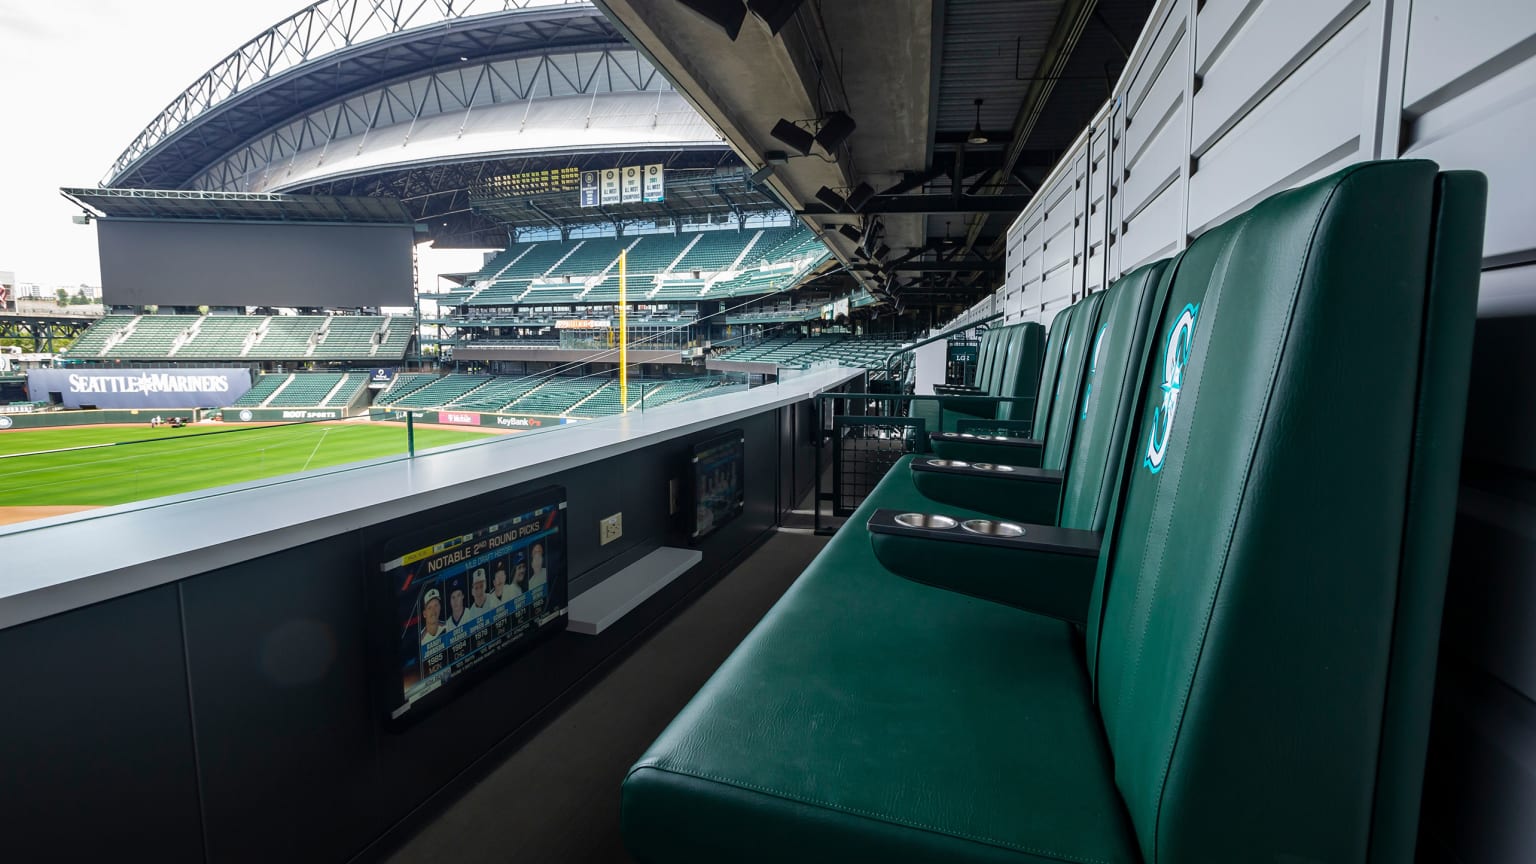 Terrace Club Seating Options Seattle